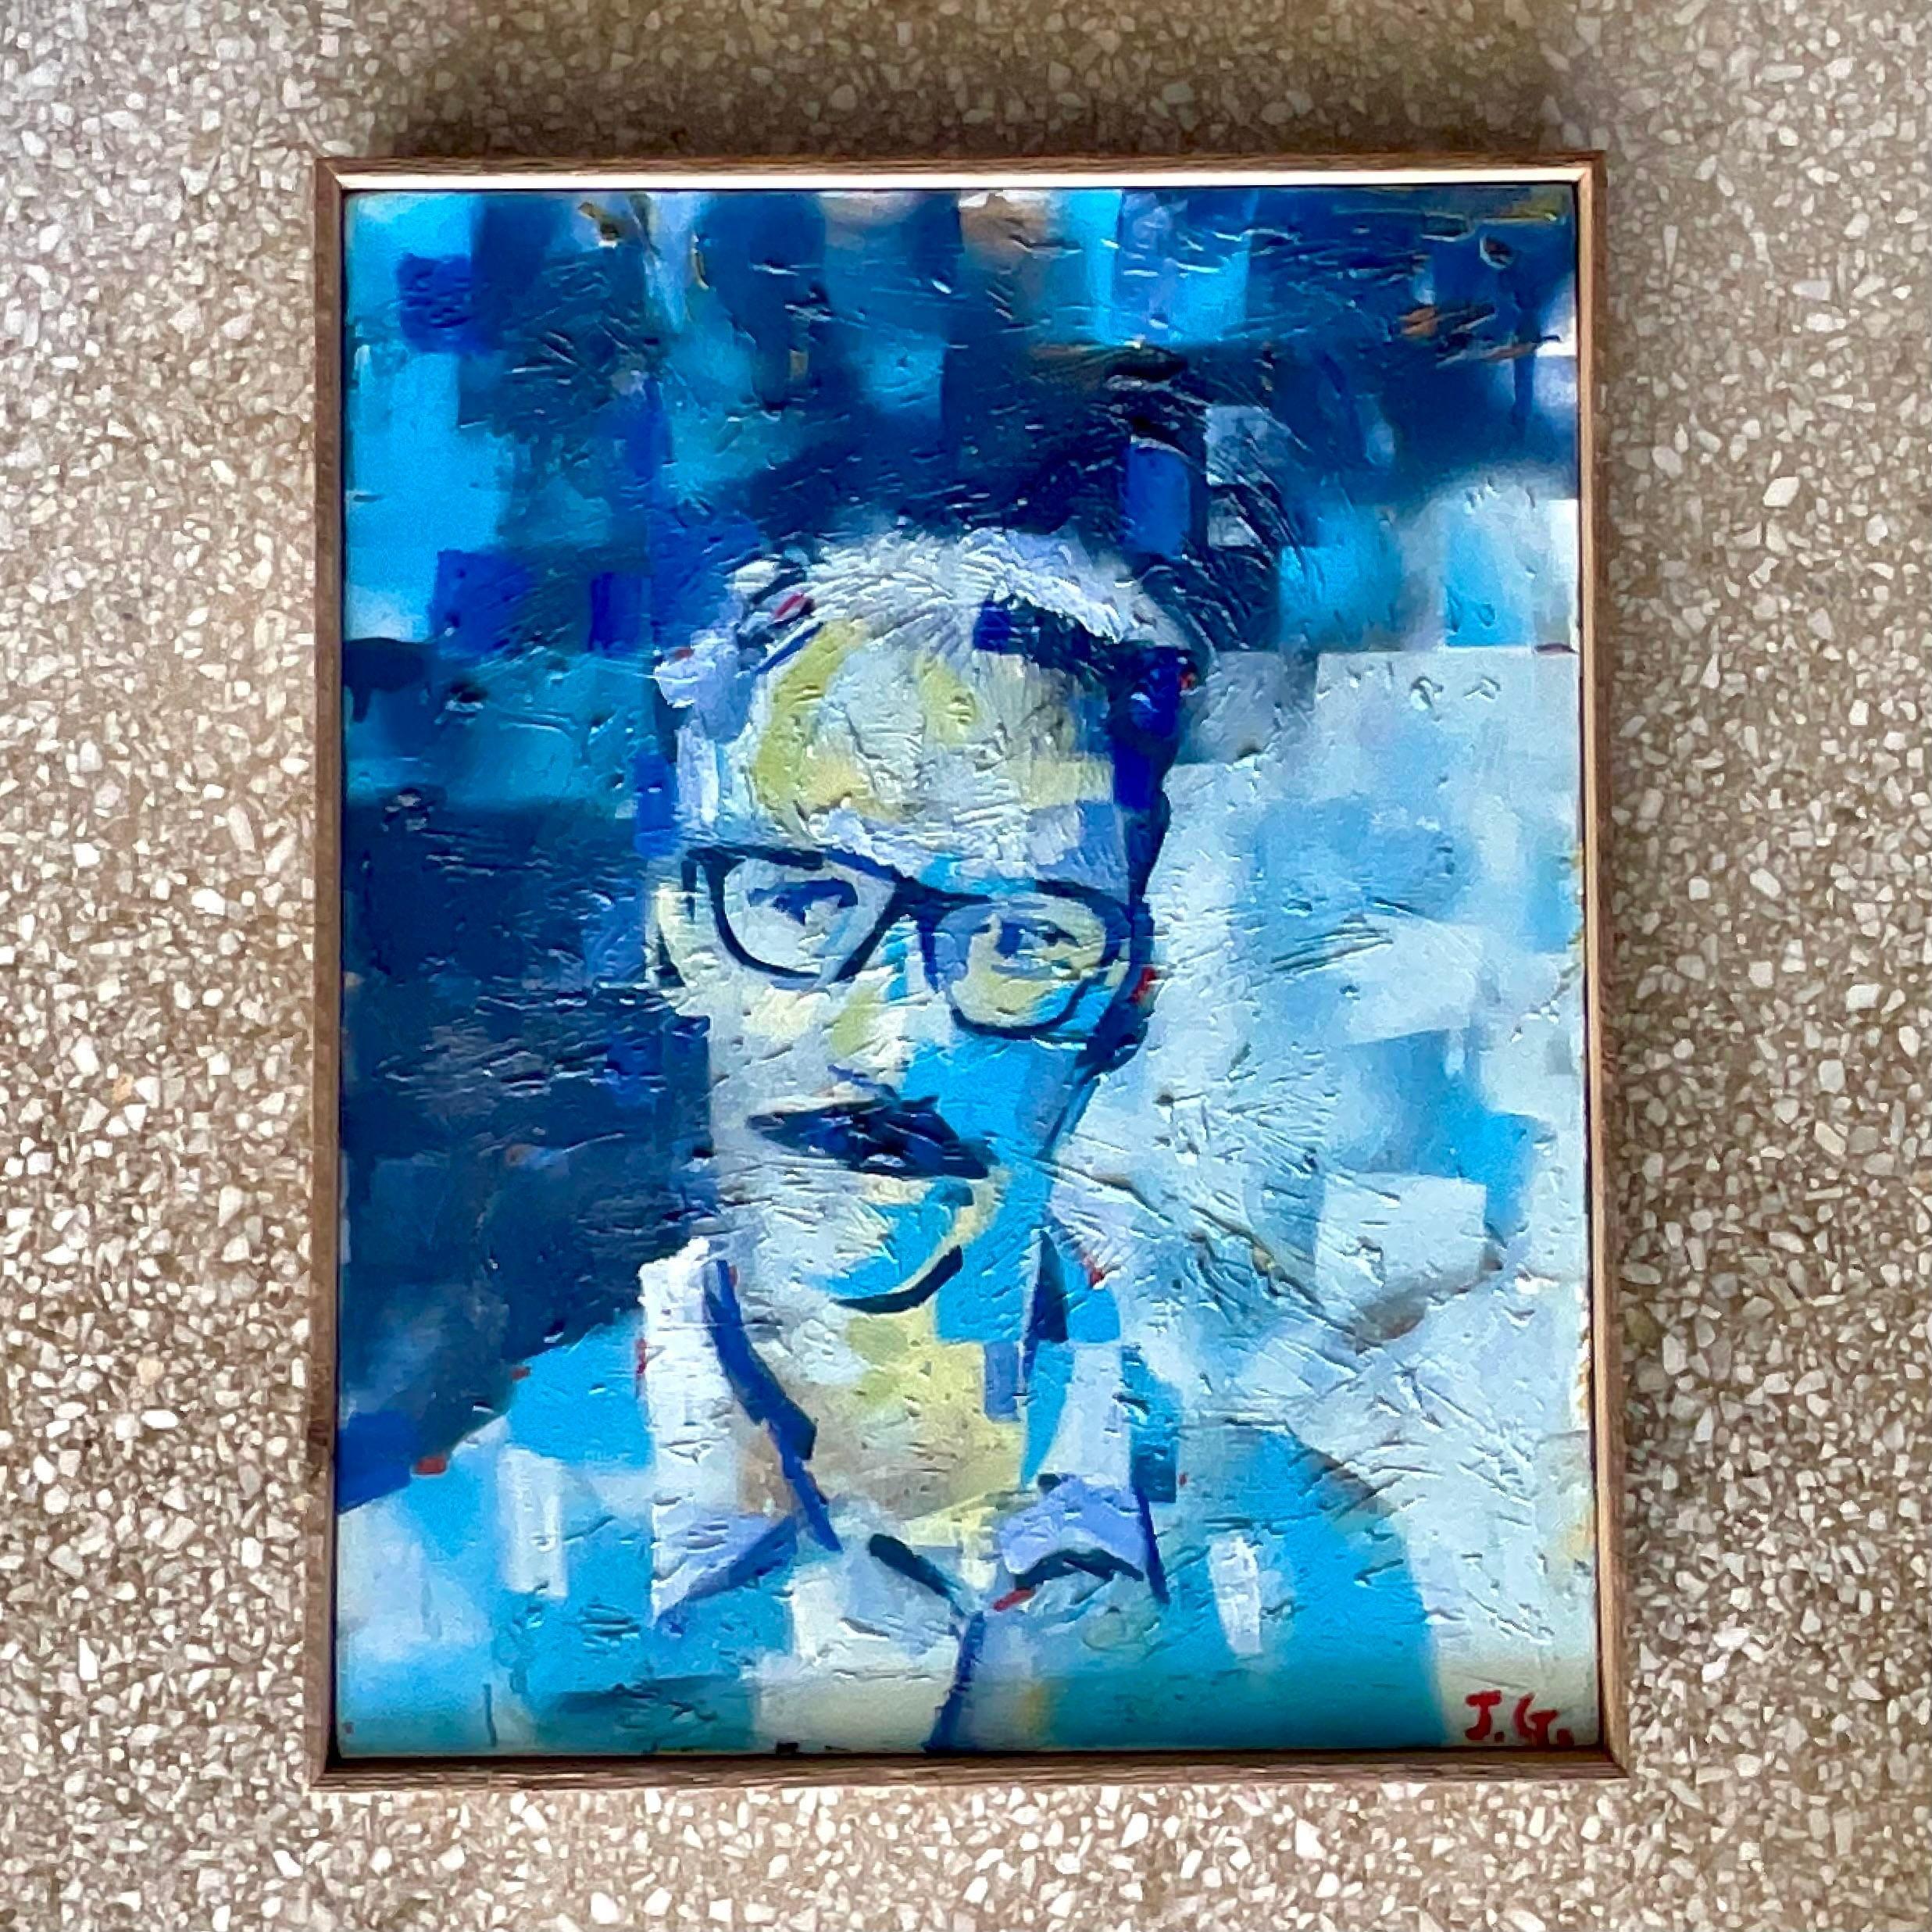 A fabulous vintage Boho original oil painting on canvas. A chic Abstract Expressionist composition in brilliant shades of blue. Signed by the artist. Acquired from an NJ estate.